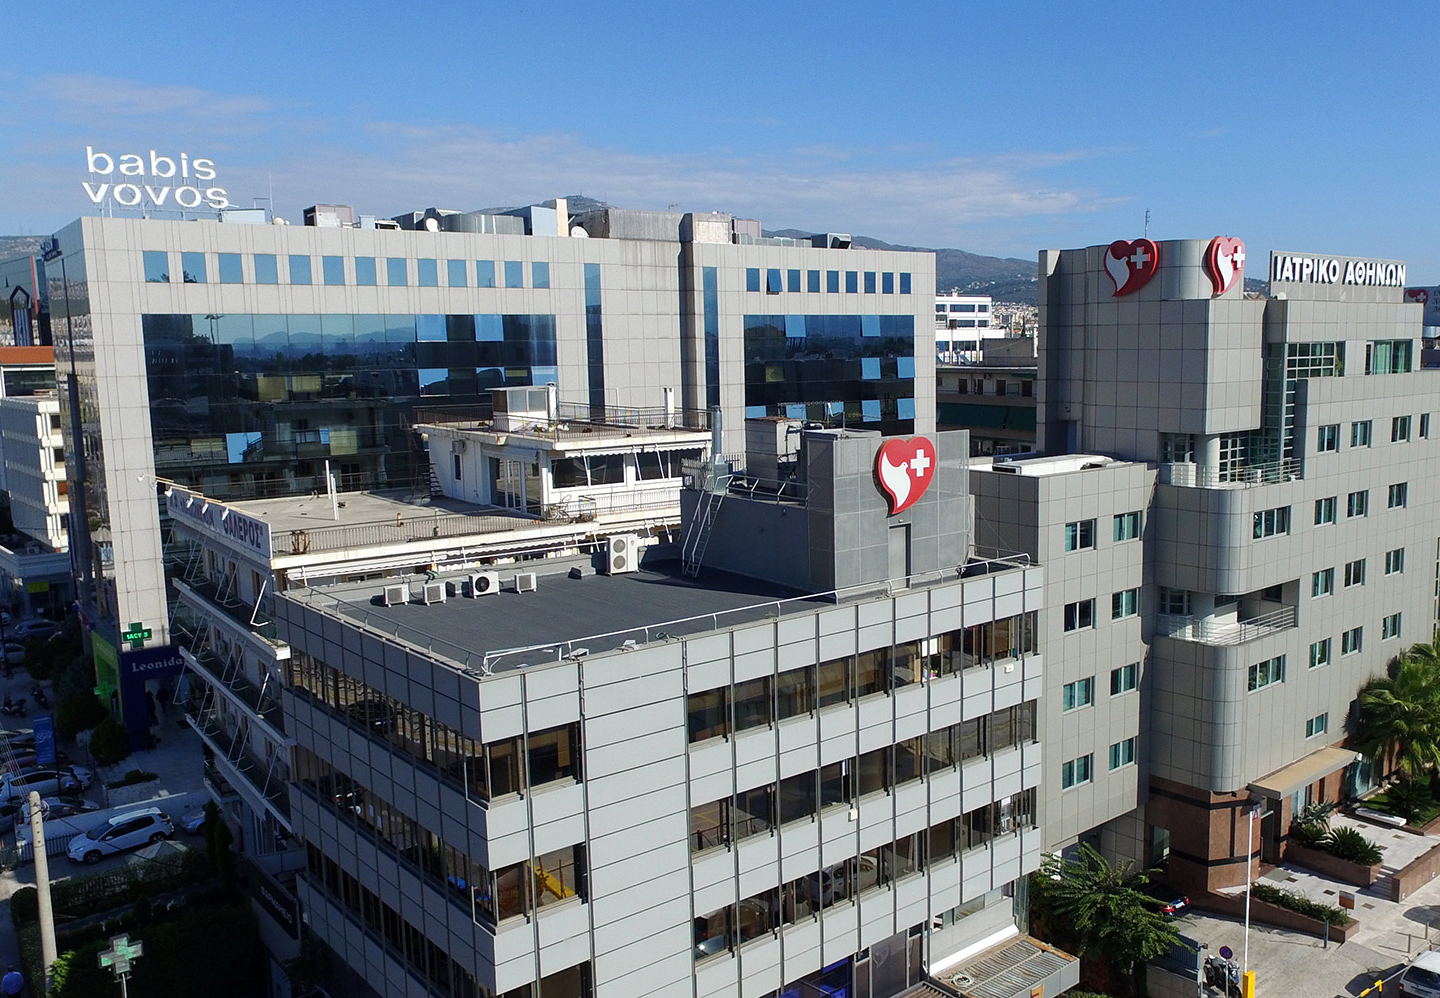 Athens Medical Group's investment in Mesogeia region was put under public consultation 